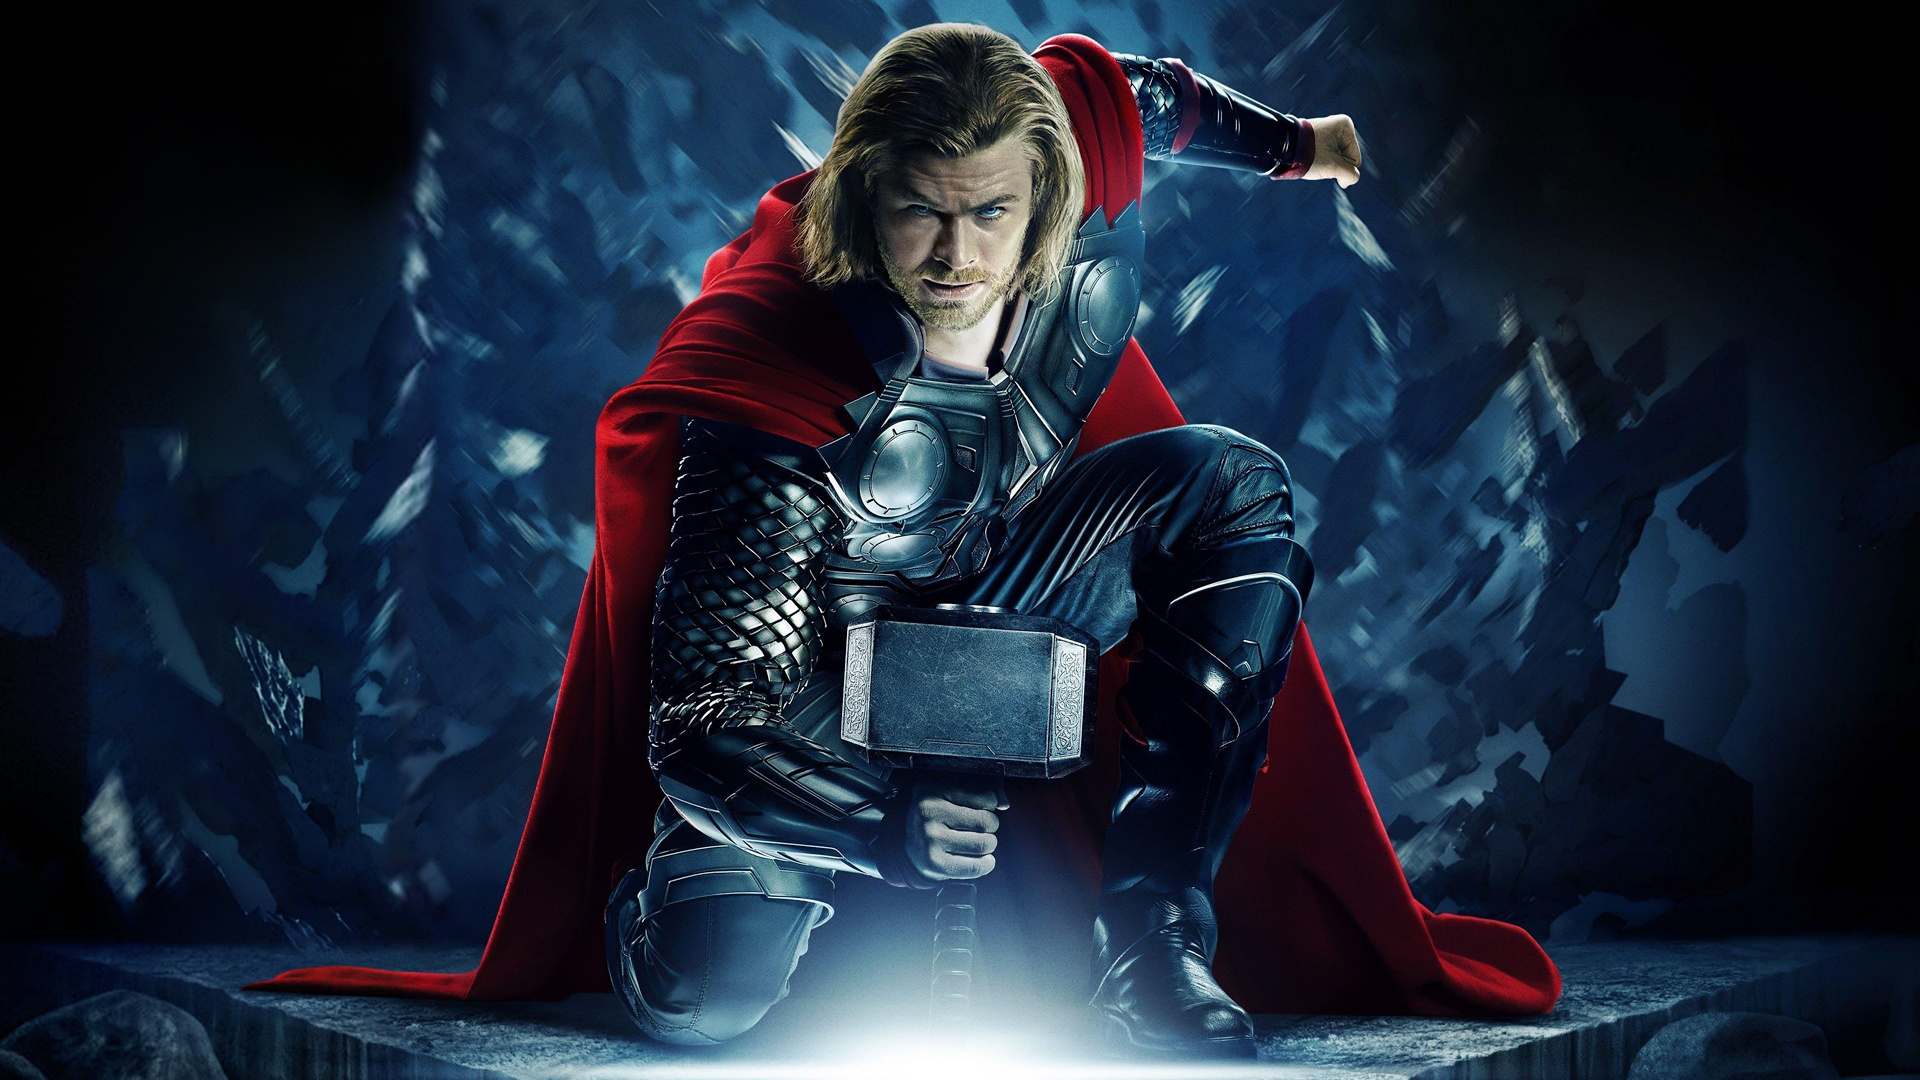 1920x1080 70+ Thor HD Wallpapers and Backgrounds